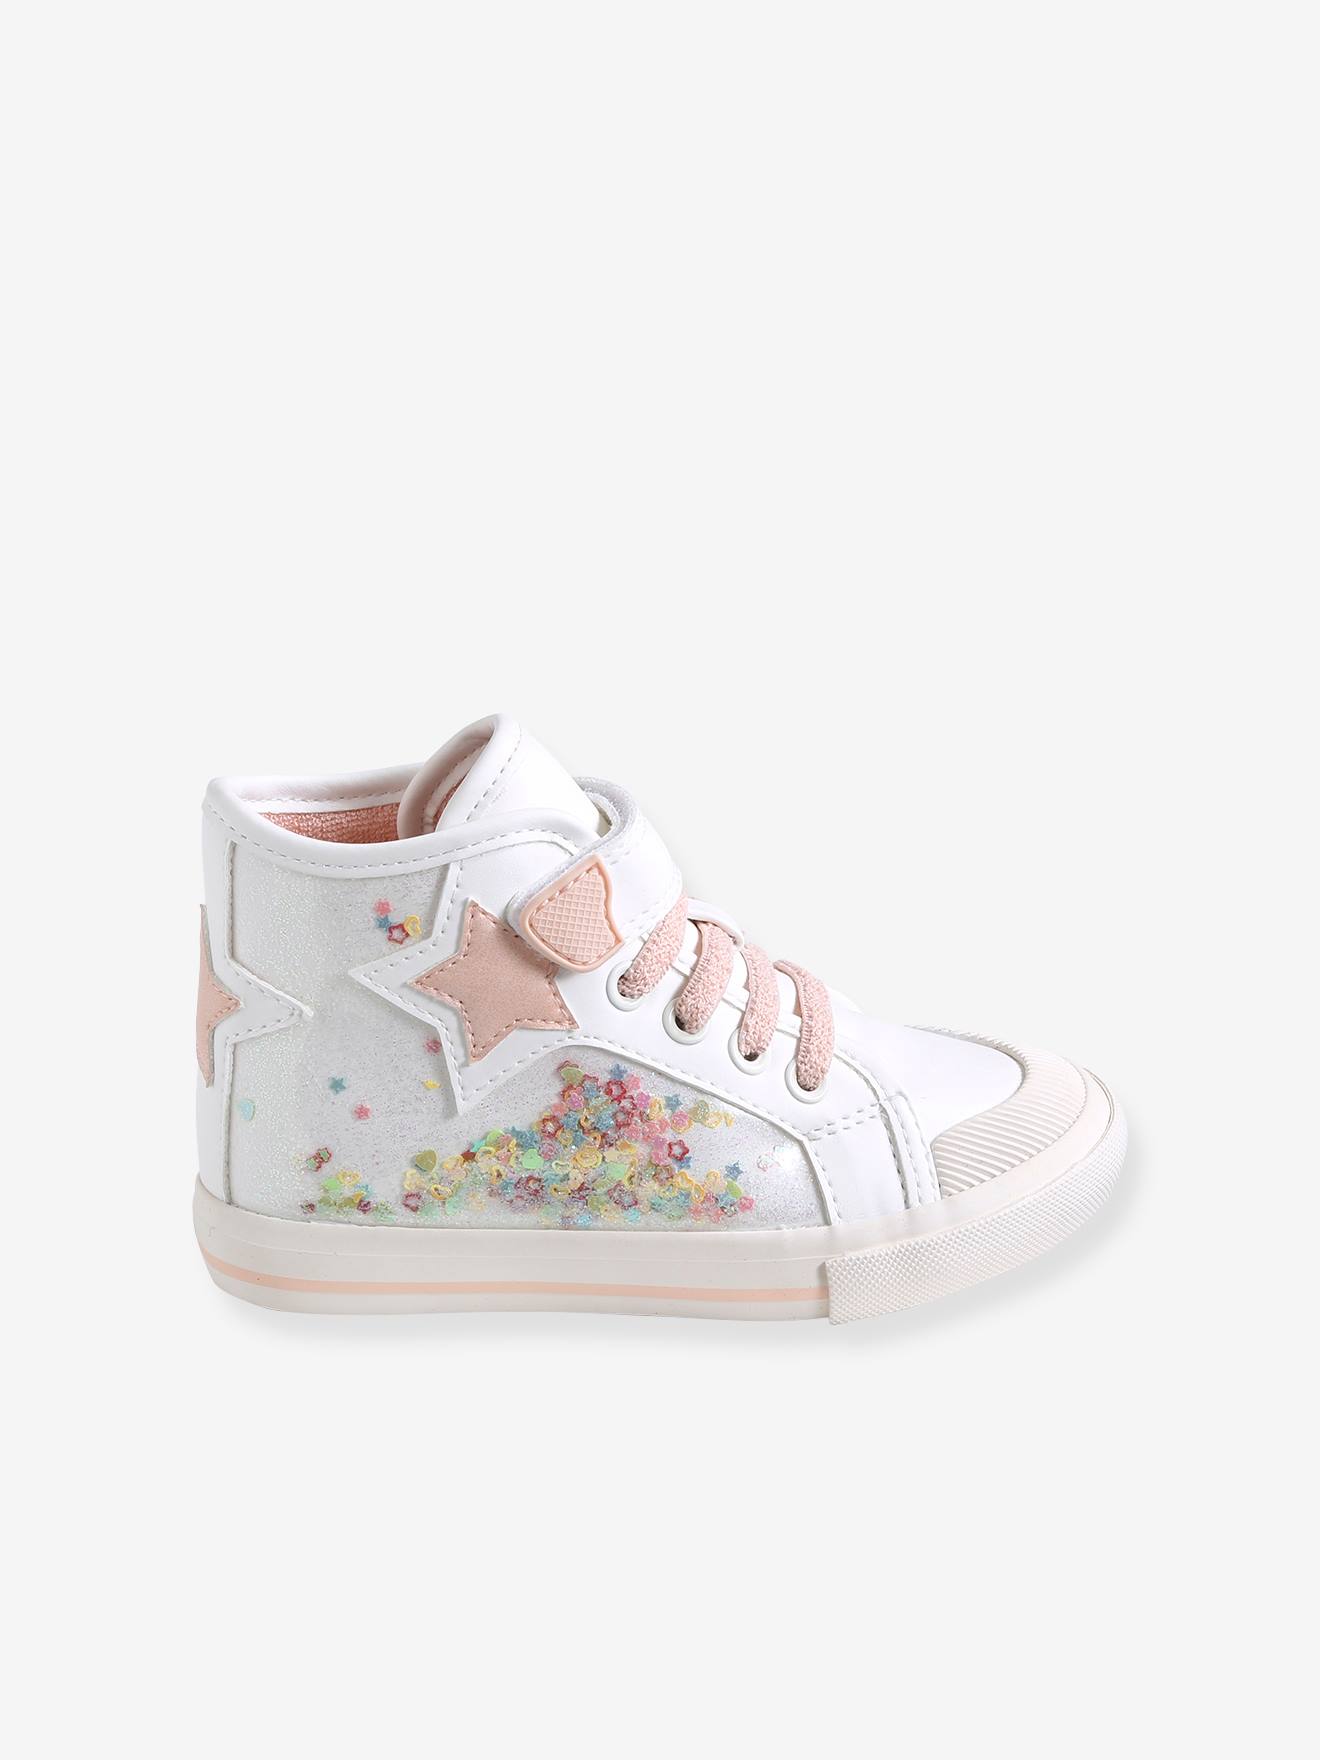 High Top Trainers With Glitter For Girls Designed For Autonomy White Shoes Vertbaudet